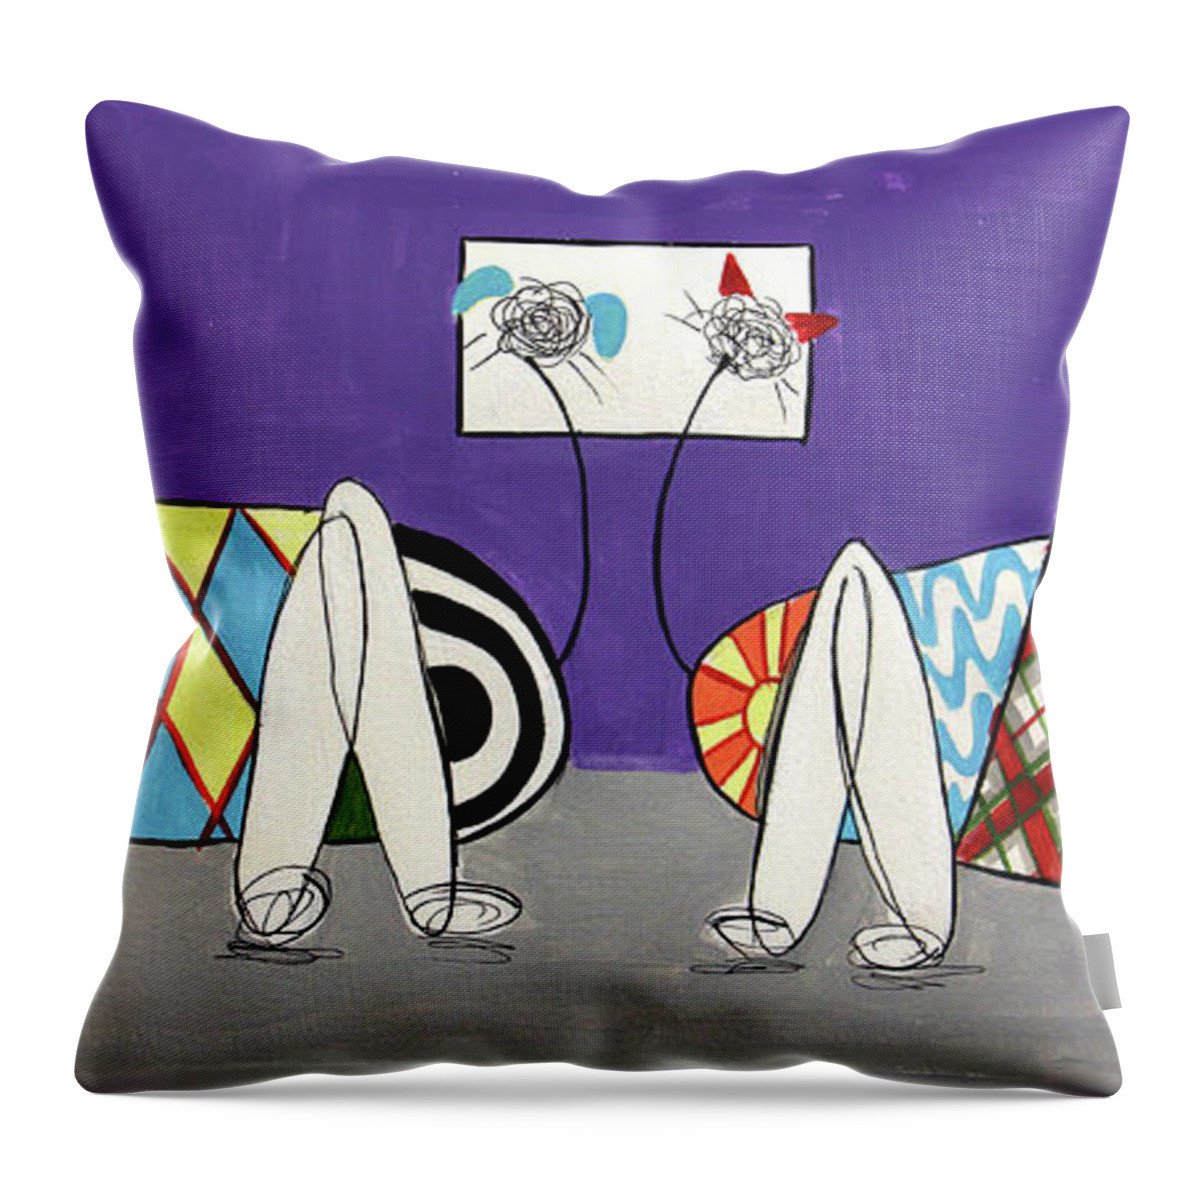 Whimsical Throw Pillow featuring the painting Artificial Intelligence Dog And Cat by Anthony Falbo